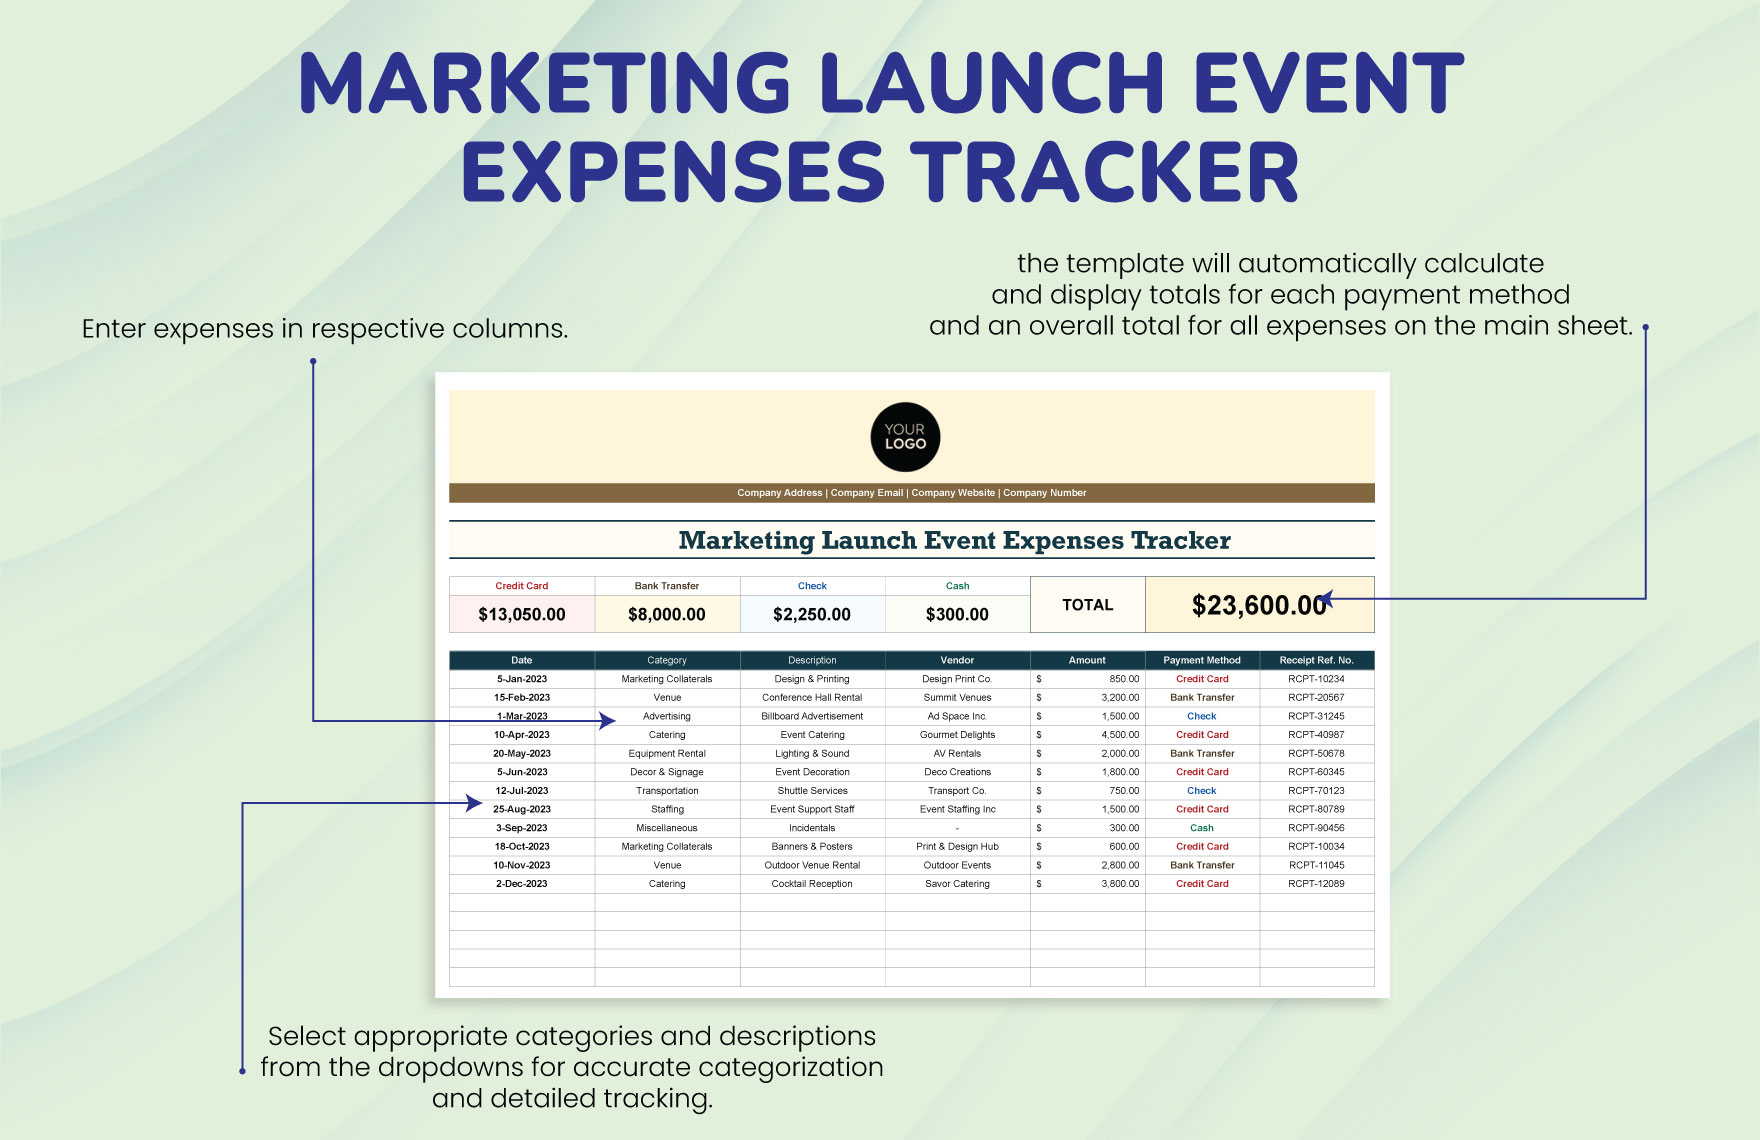 Marketing Launch Event Expenses Tracker Template